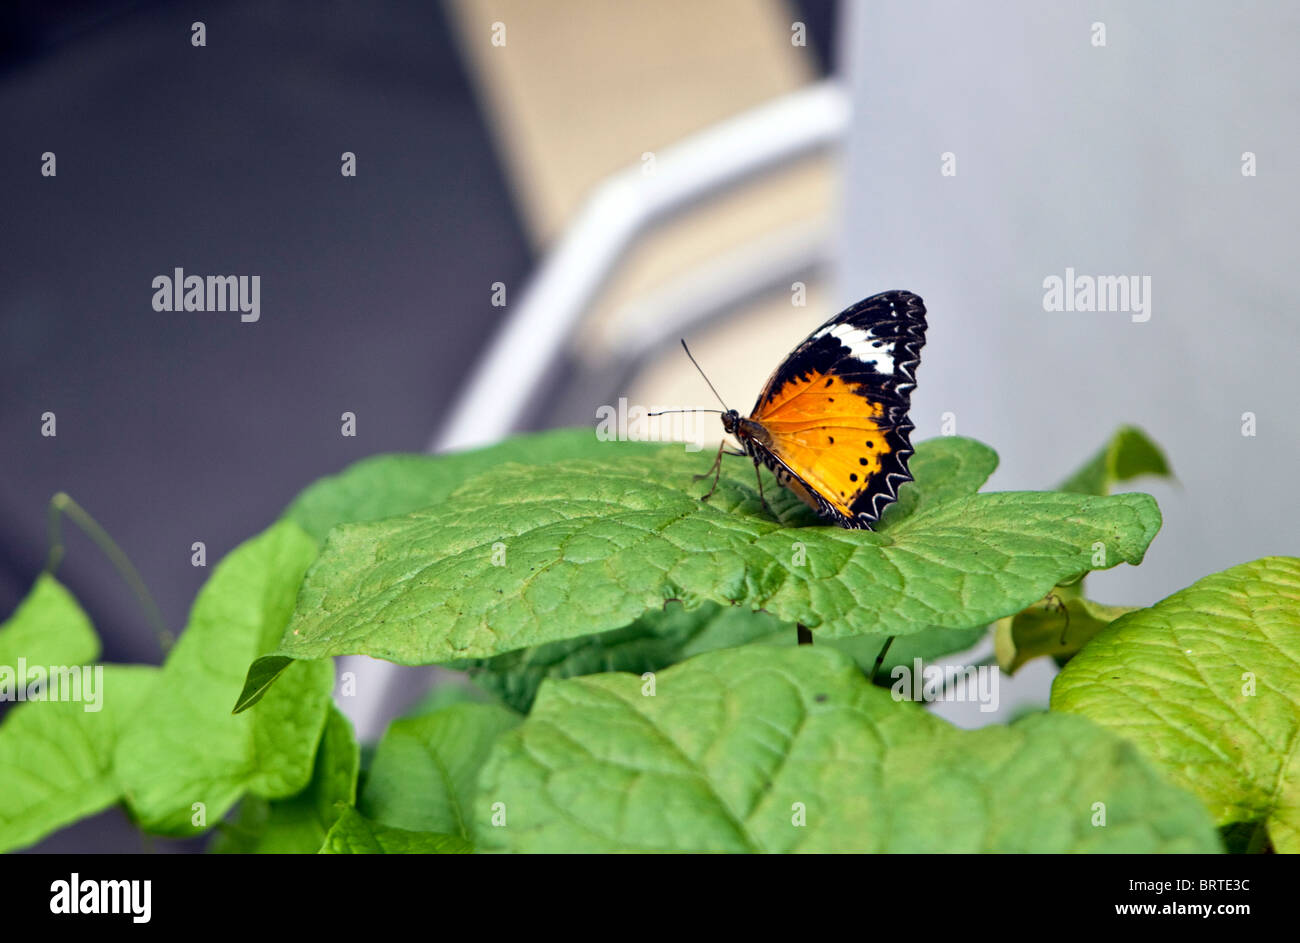 Butterflies are seen in an enclosure in Singapore's Changi airport Stock Photo